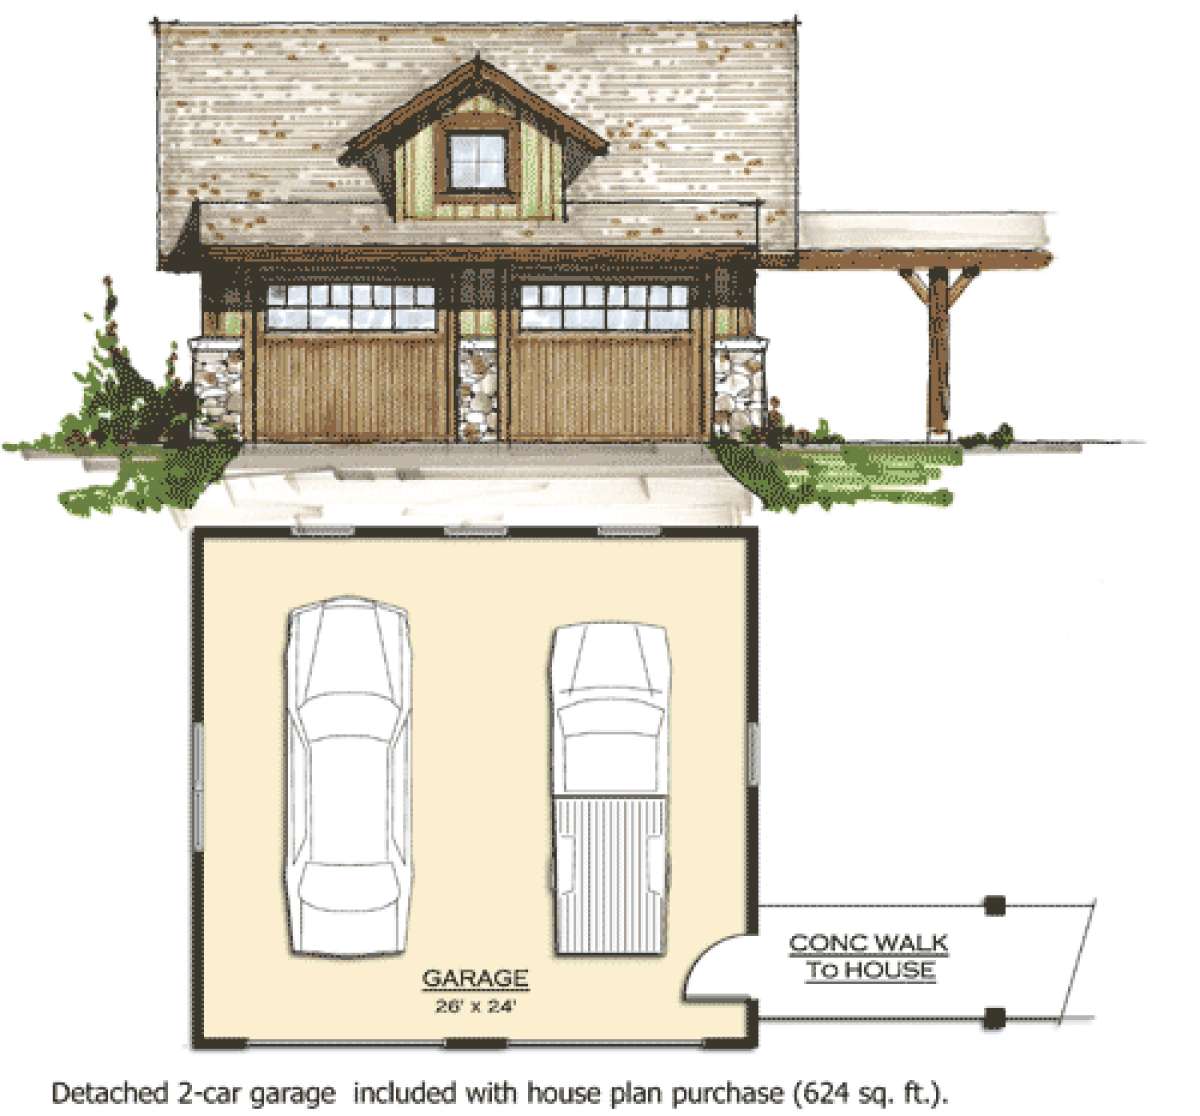 Garage for House Plan #8504-00032